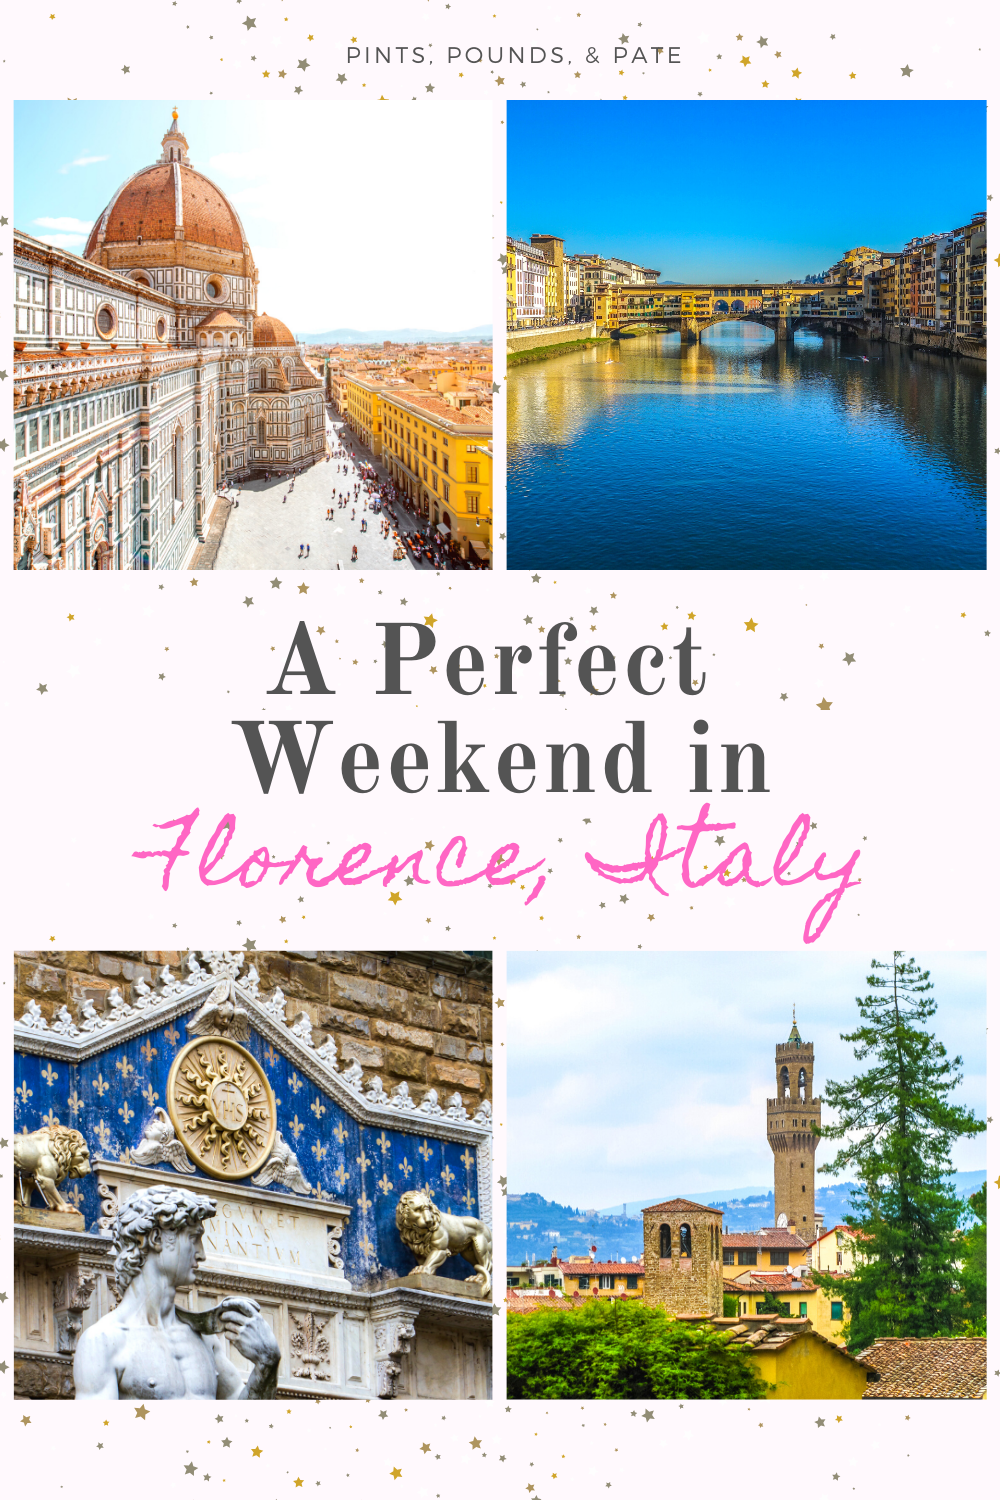 Spending a Weekend in Florence, Italy